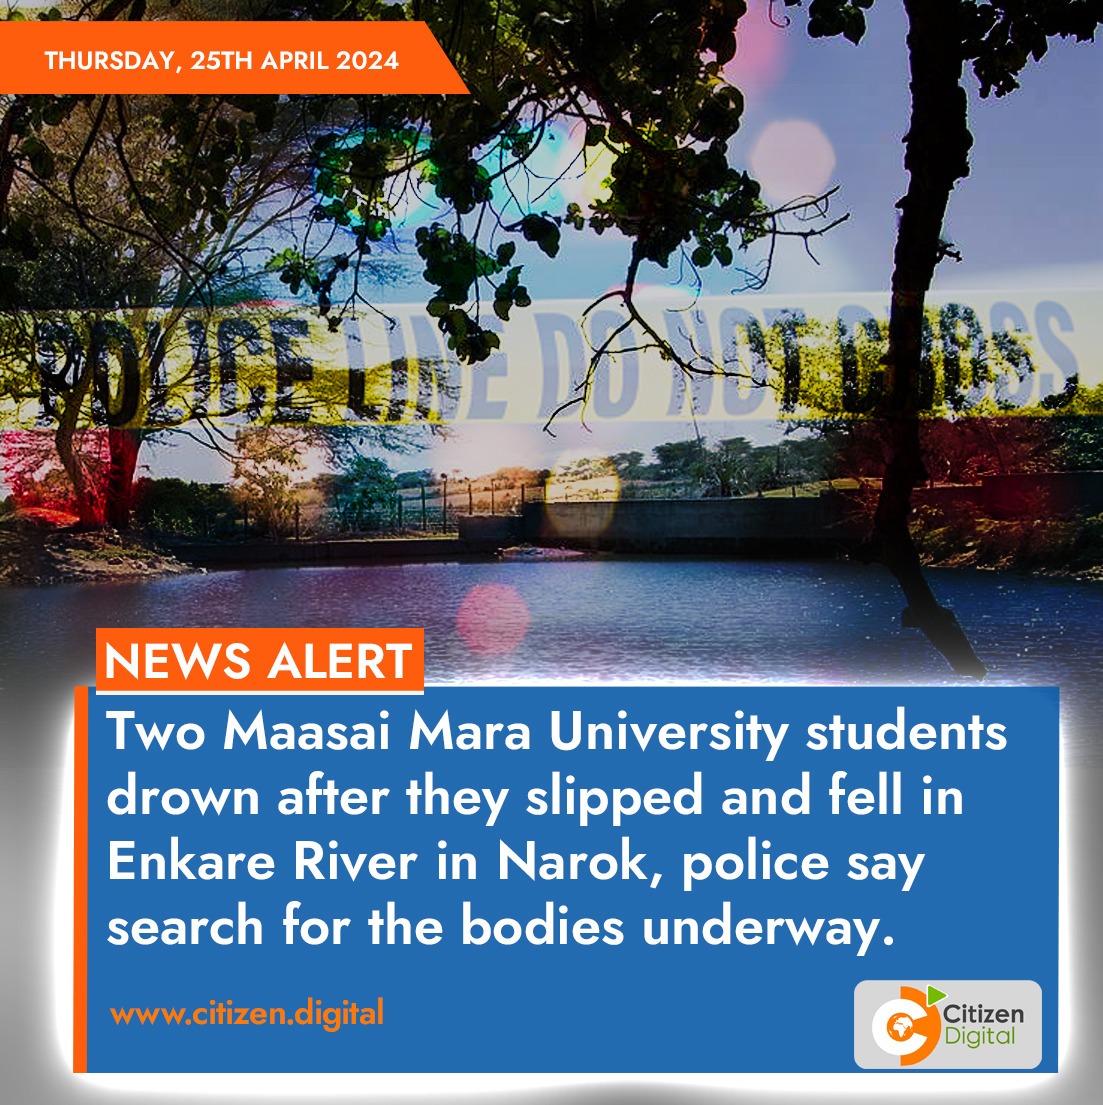 Two Maasai Mara University students drown after they slipped and fell in Enkare River in Narok, police say search for the bodies underway